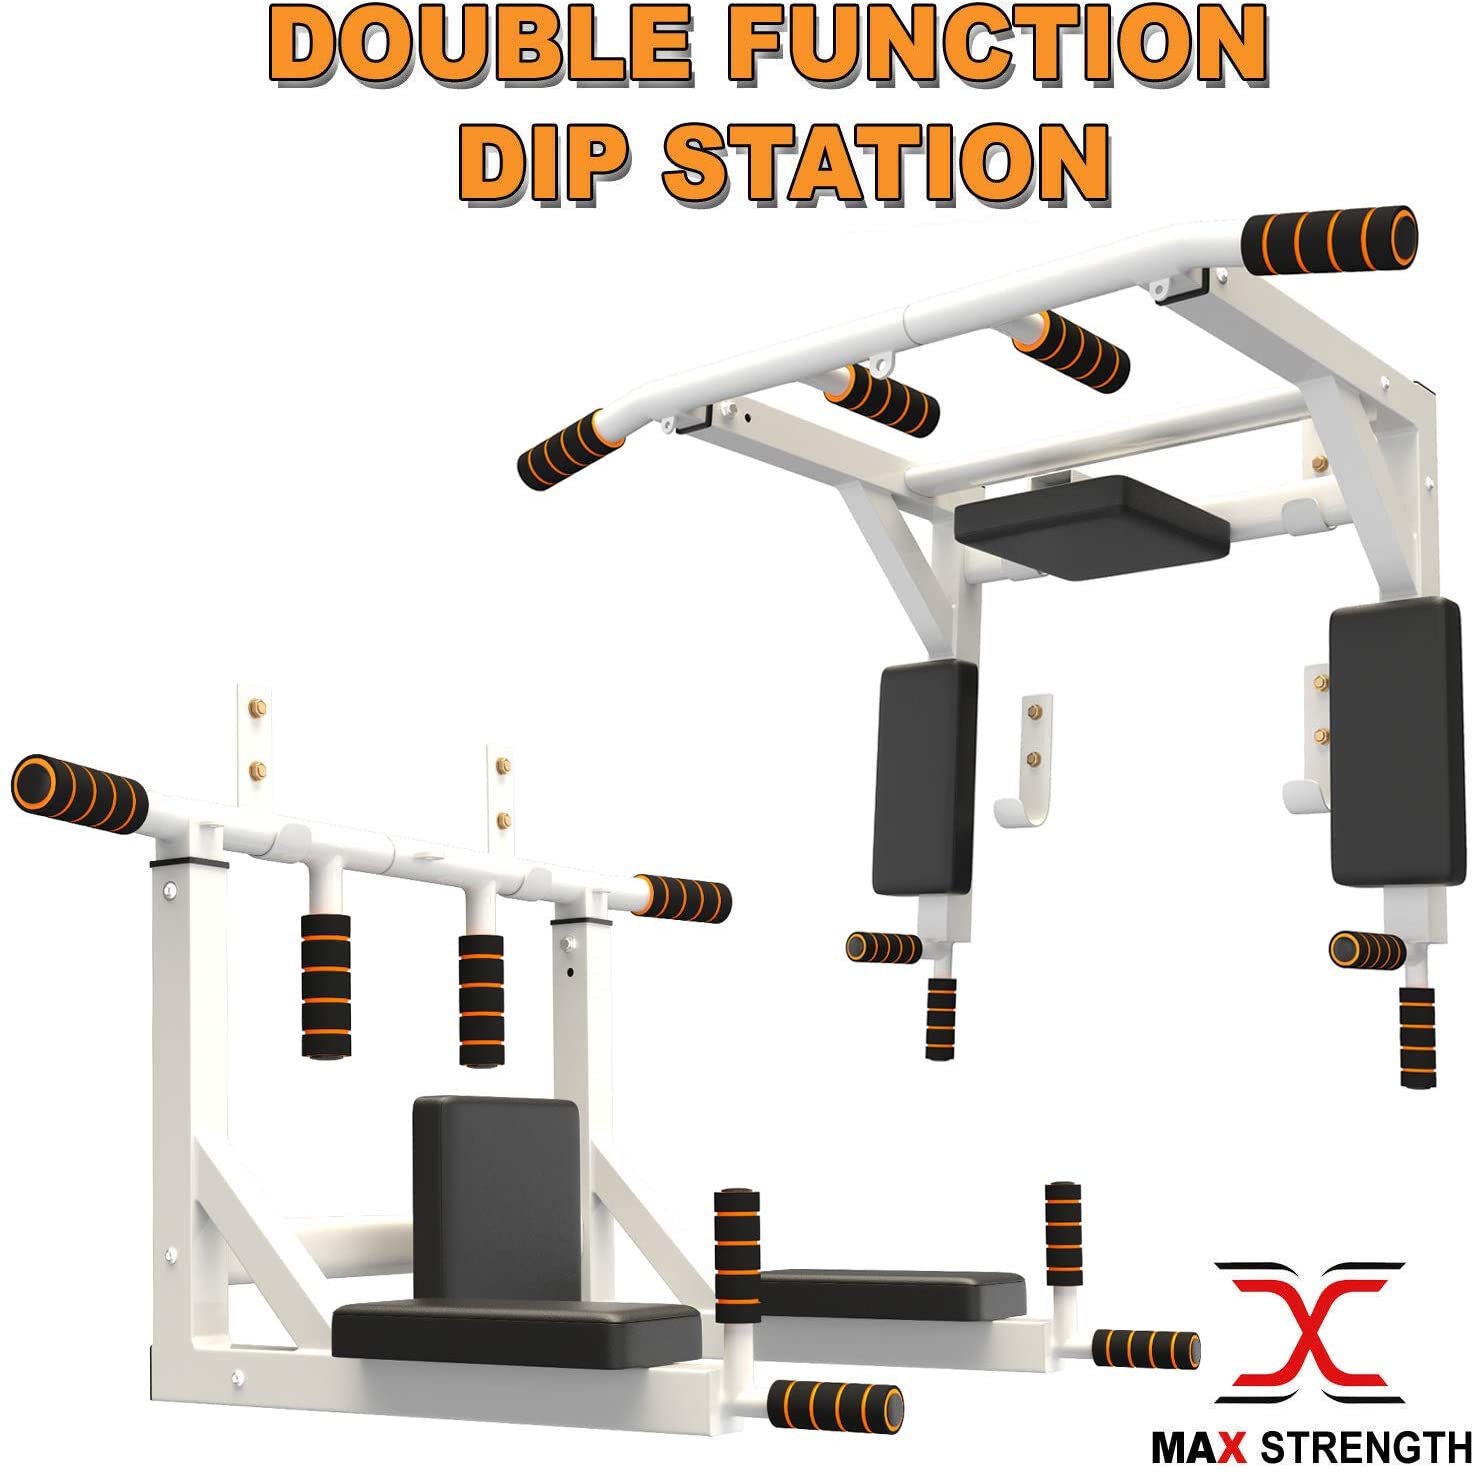 Max Strength - Multifunctional Wall Mounted Horizontal Bar Wall Mounted Pull Up Bar Chin Up, Power Tower Pull Up Dip Station Home Gym Bar Equipment